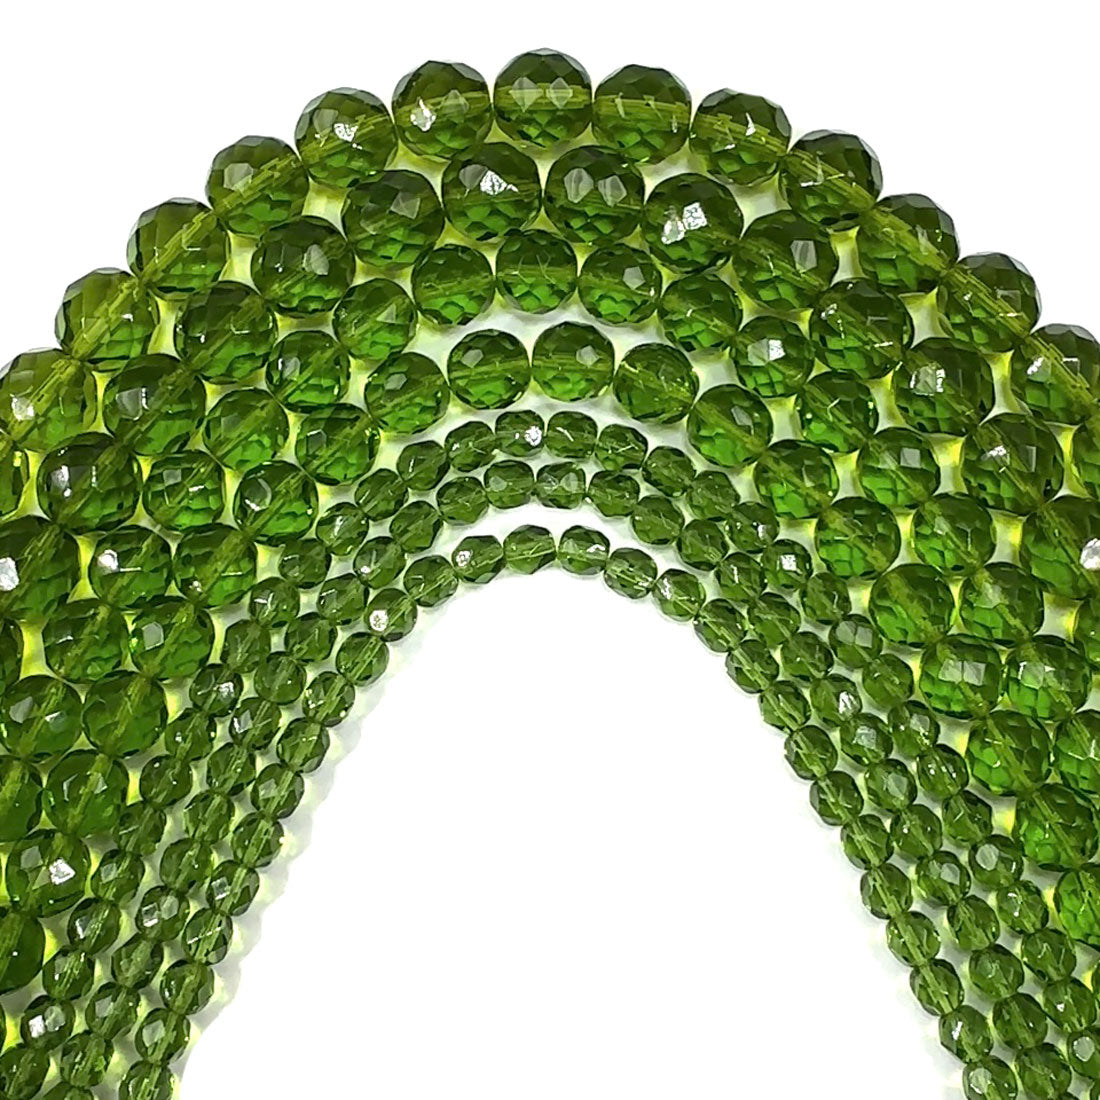 Green Olivine Czech Fire Polished Round Faceted Glass Beads olive green 6mm 10mm 12mm 14mm